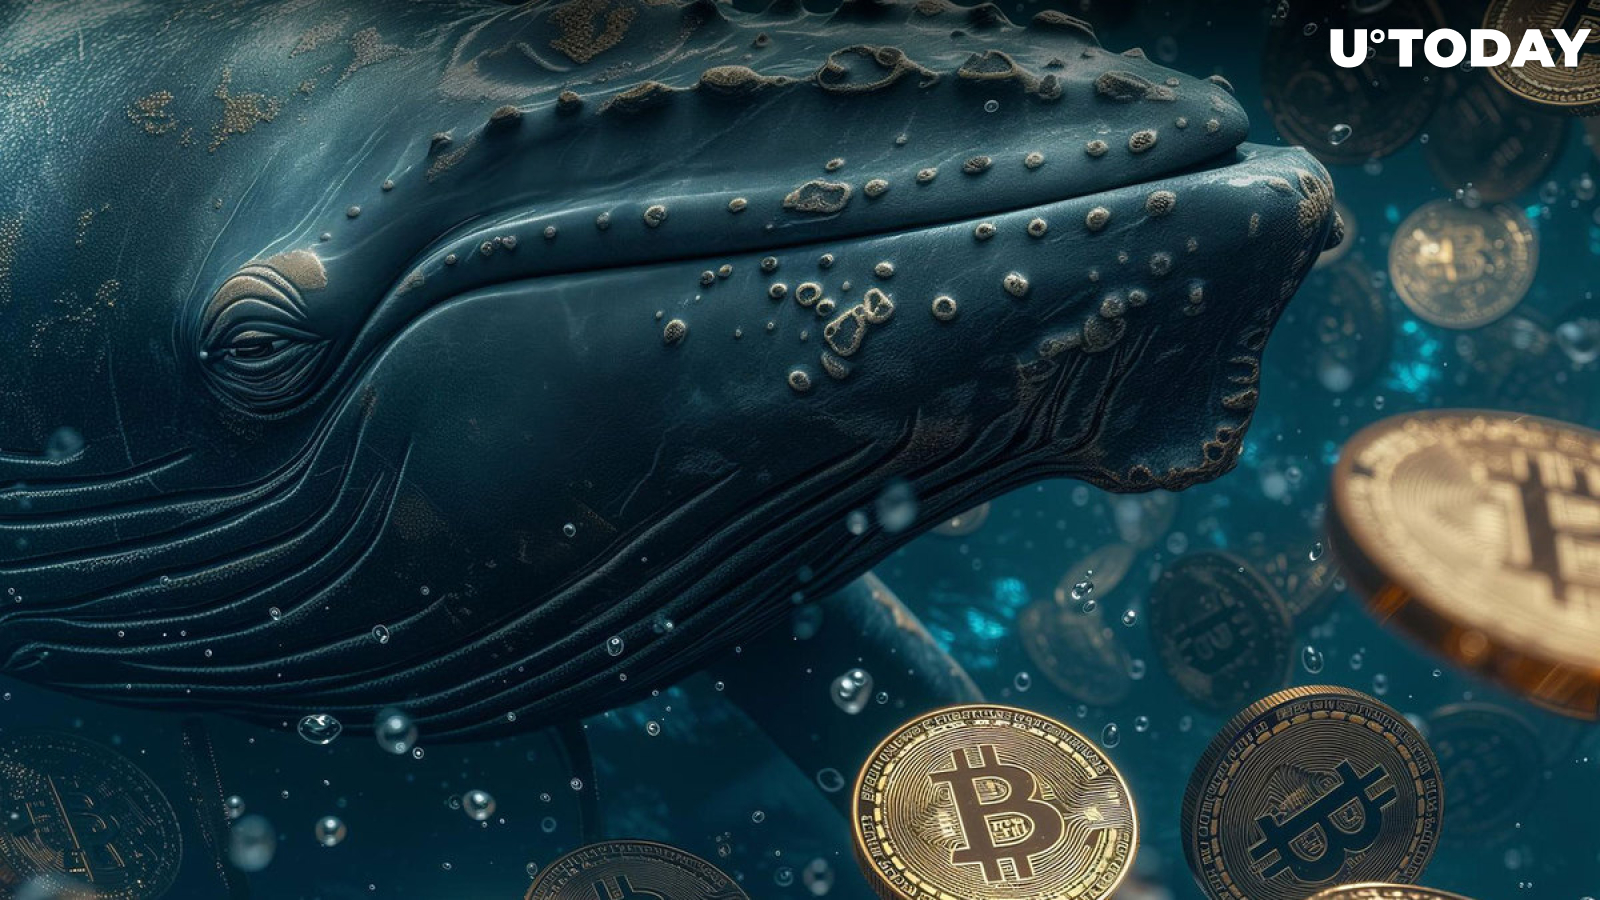 Mysterious whale dumps $322 million in Bitcoin on major US exchange